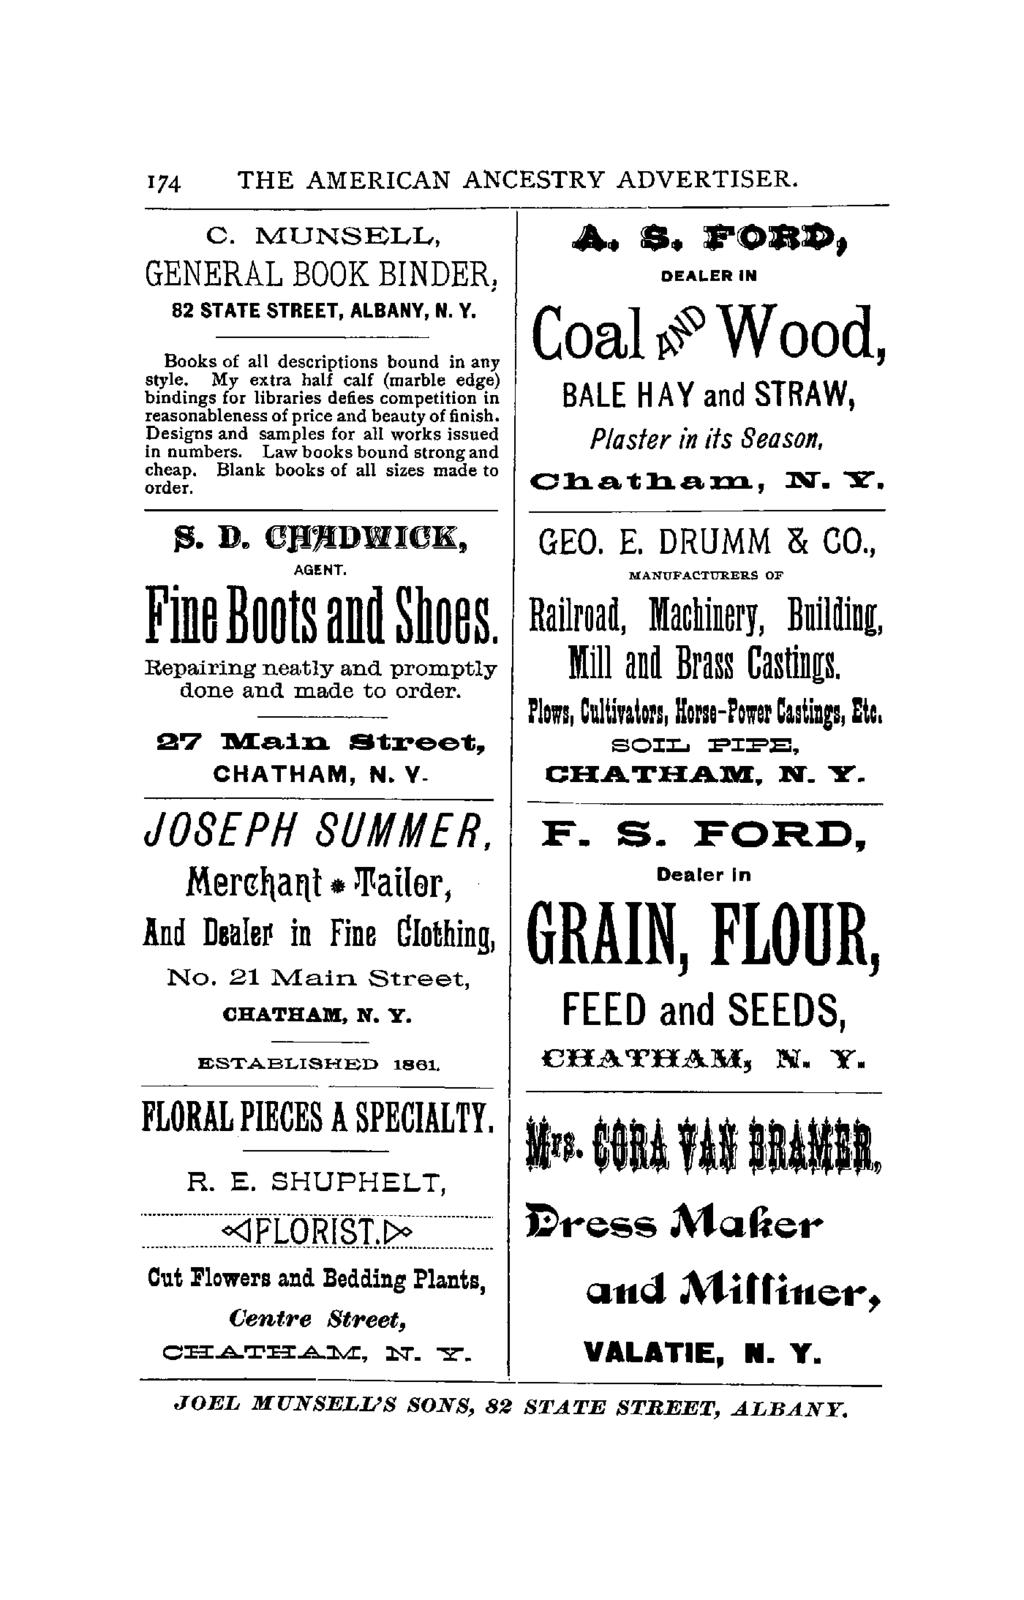 174 THE AMERICAN ANCESTRY ADVERTISER. C. MUNSELL, GENERAL BOOK BINDER: 82 STATE STREET, ALBANY, N. Y. Books of all descriptions bound in any style.